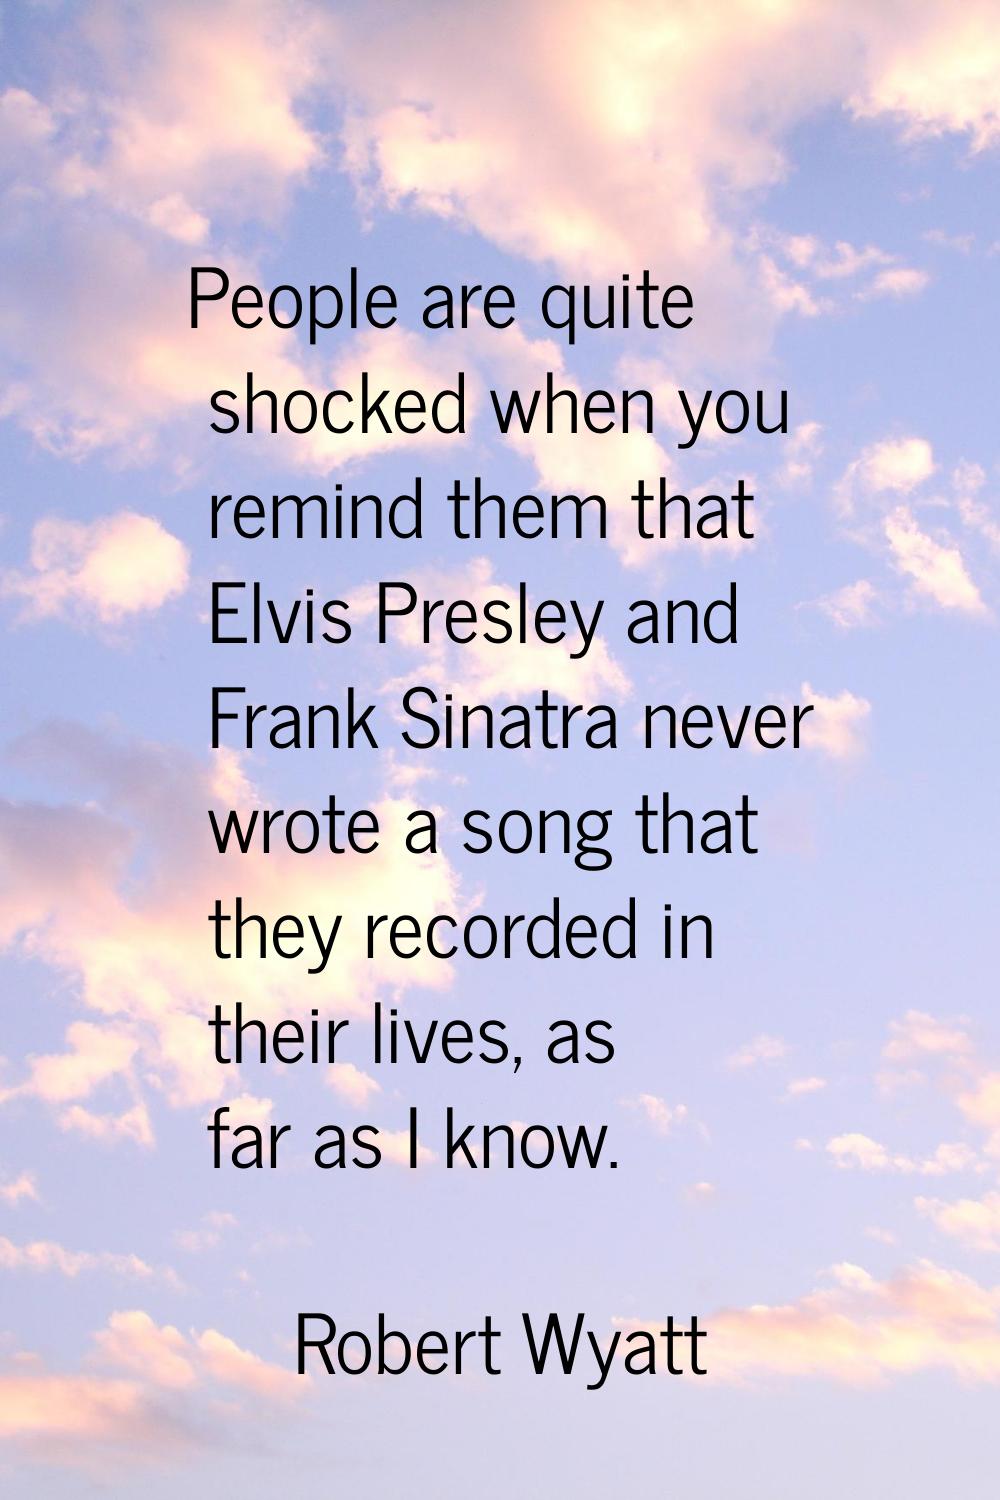 People are quite shocked when you remind them that Elvis Presley and Frank Sinatra never wrote a so